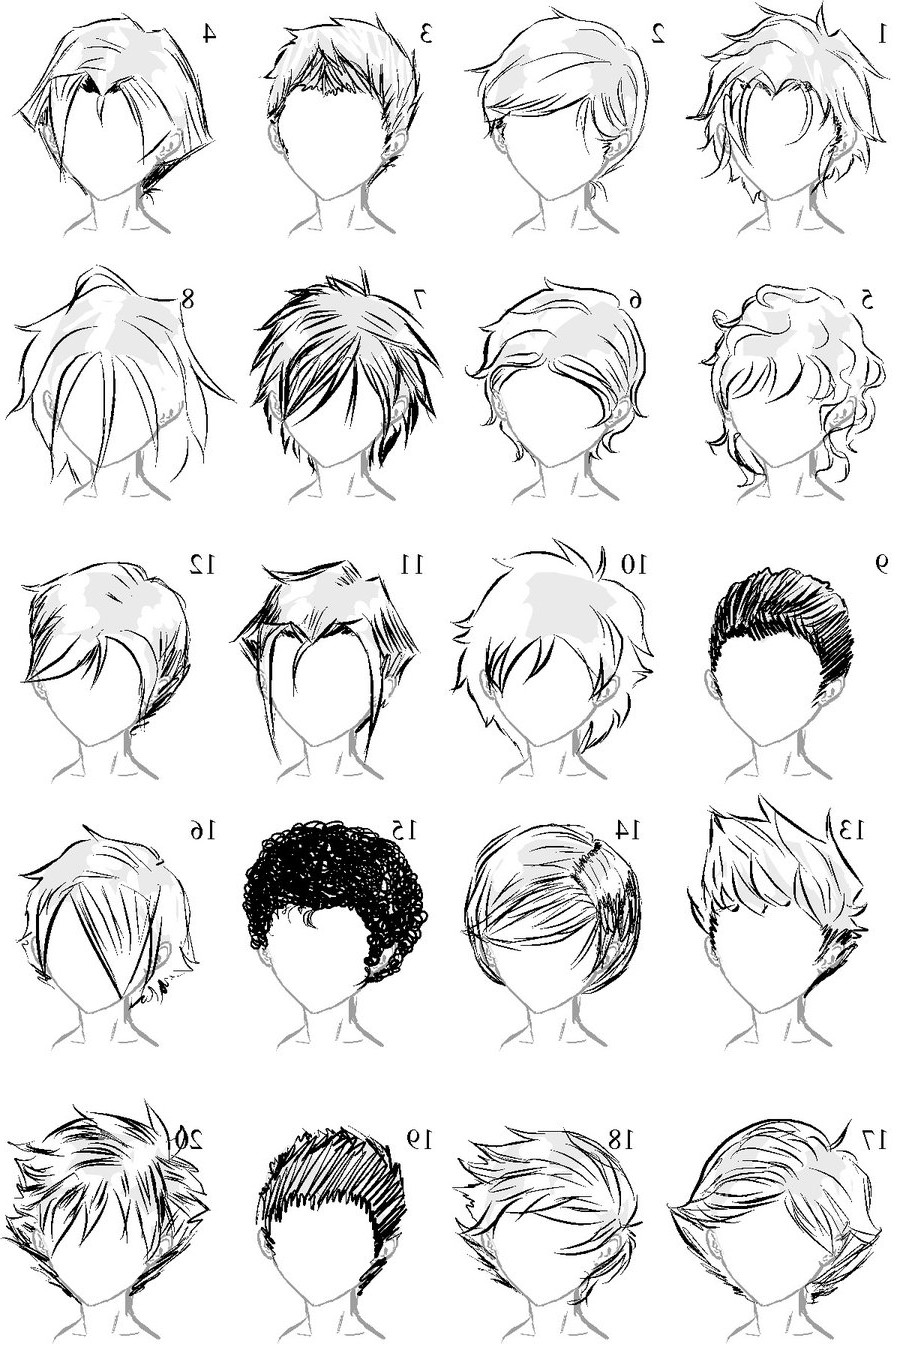 Anime Hairstyle Male
 Male Anime Hairstyles Drawing at PaintingValley